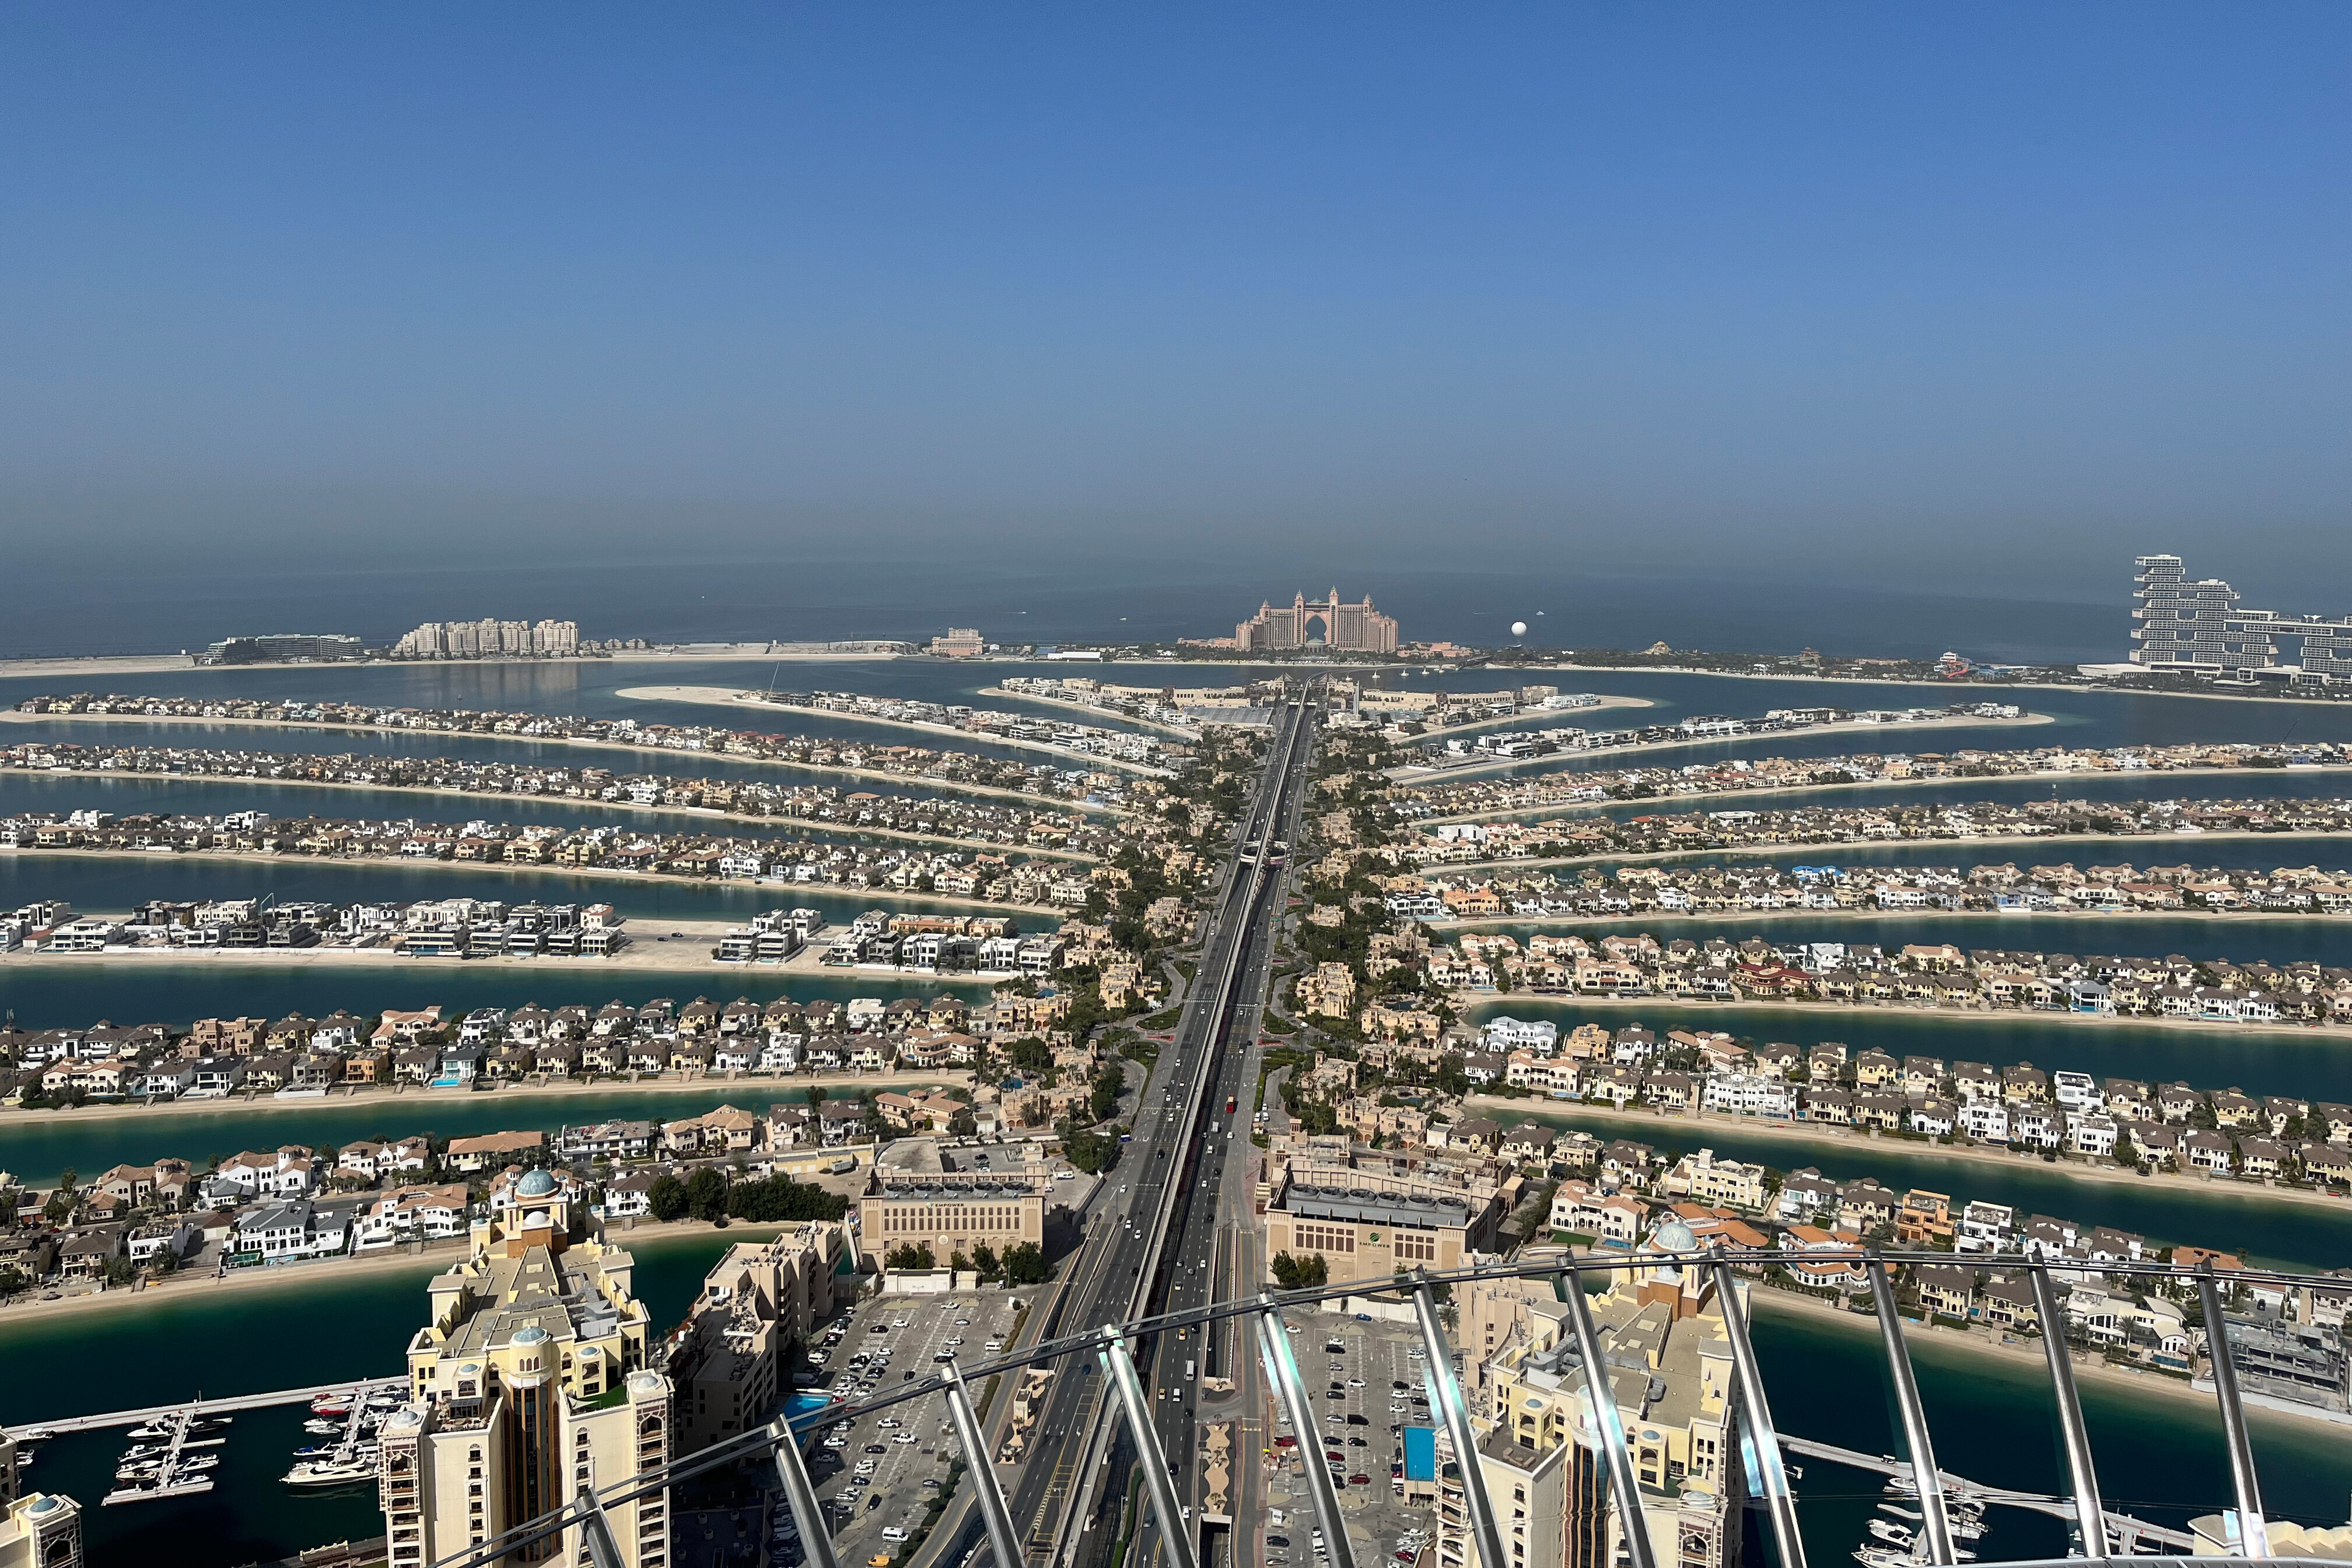 Dubai's 3rd Property Cycle: What Awaits Investors in the Future?